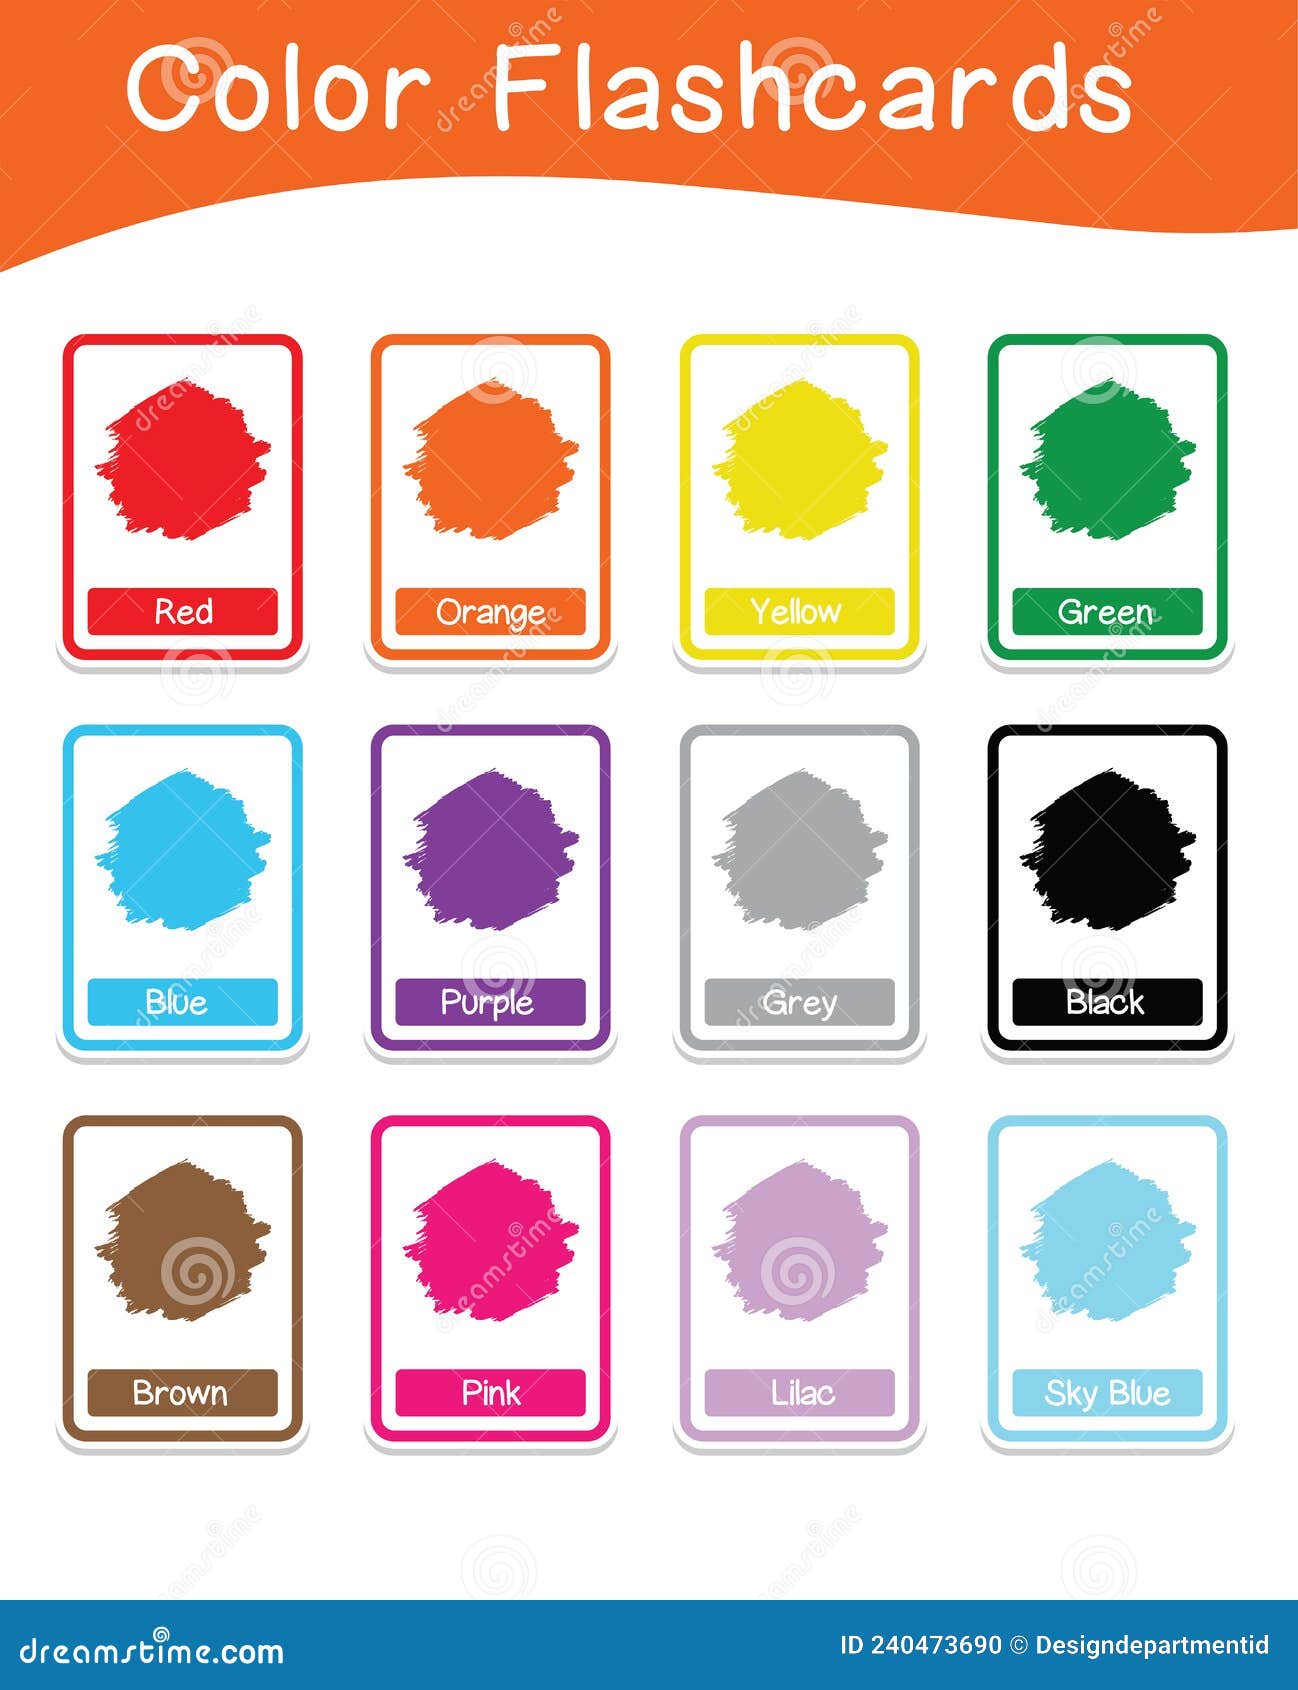 vector-set-of-color-flashcards-color-flashcards-edition-stock-vector